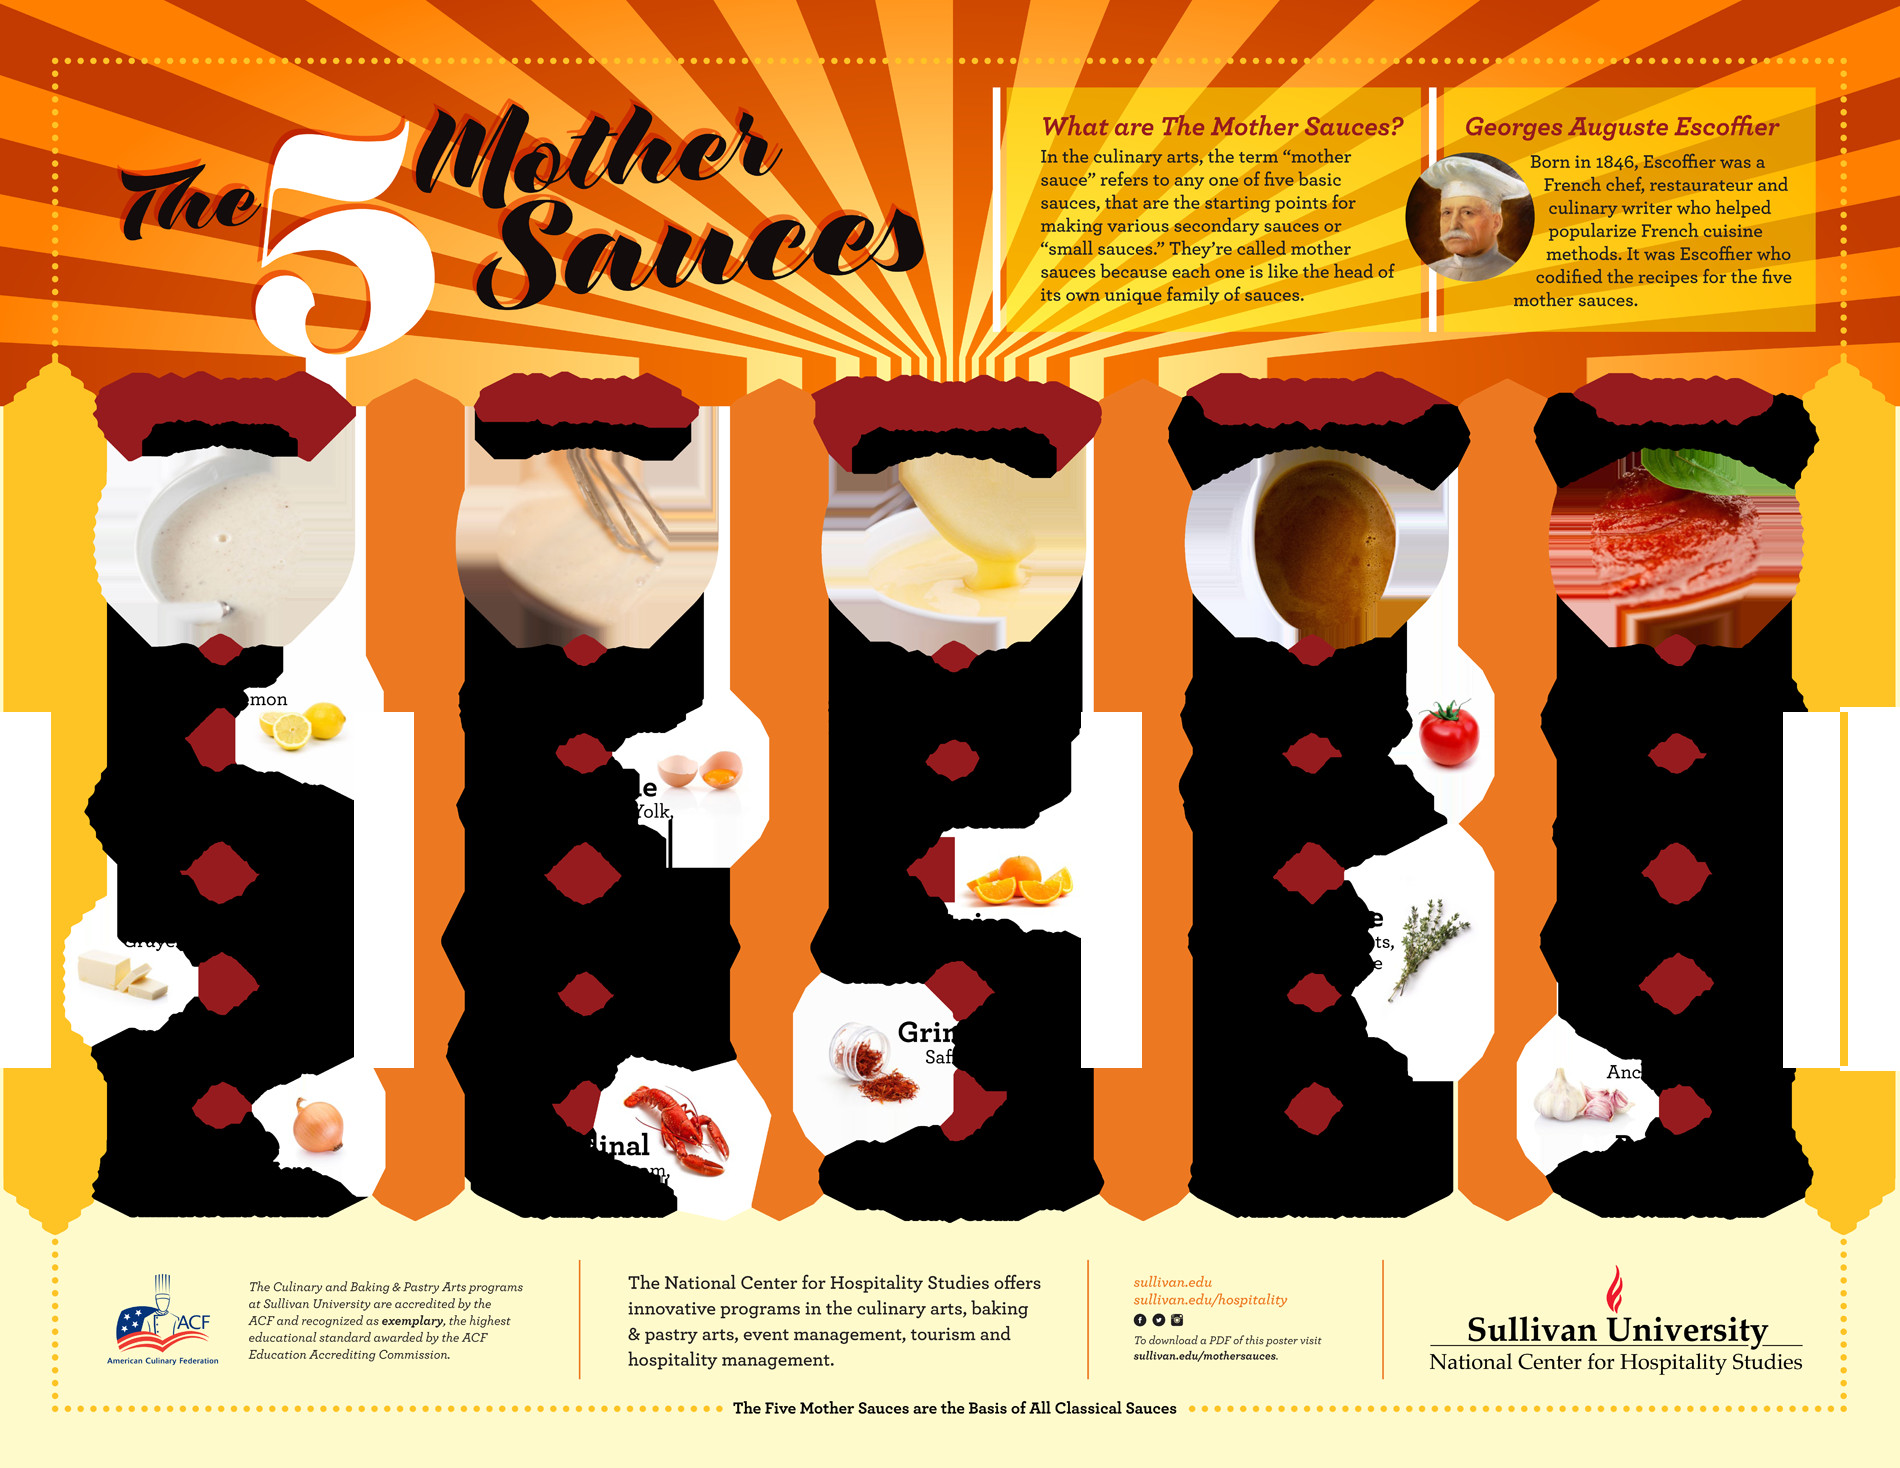 Five Mother Sauces
 The 5 Mothersauces